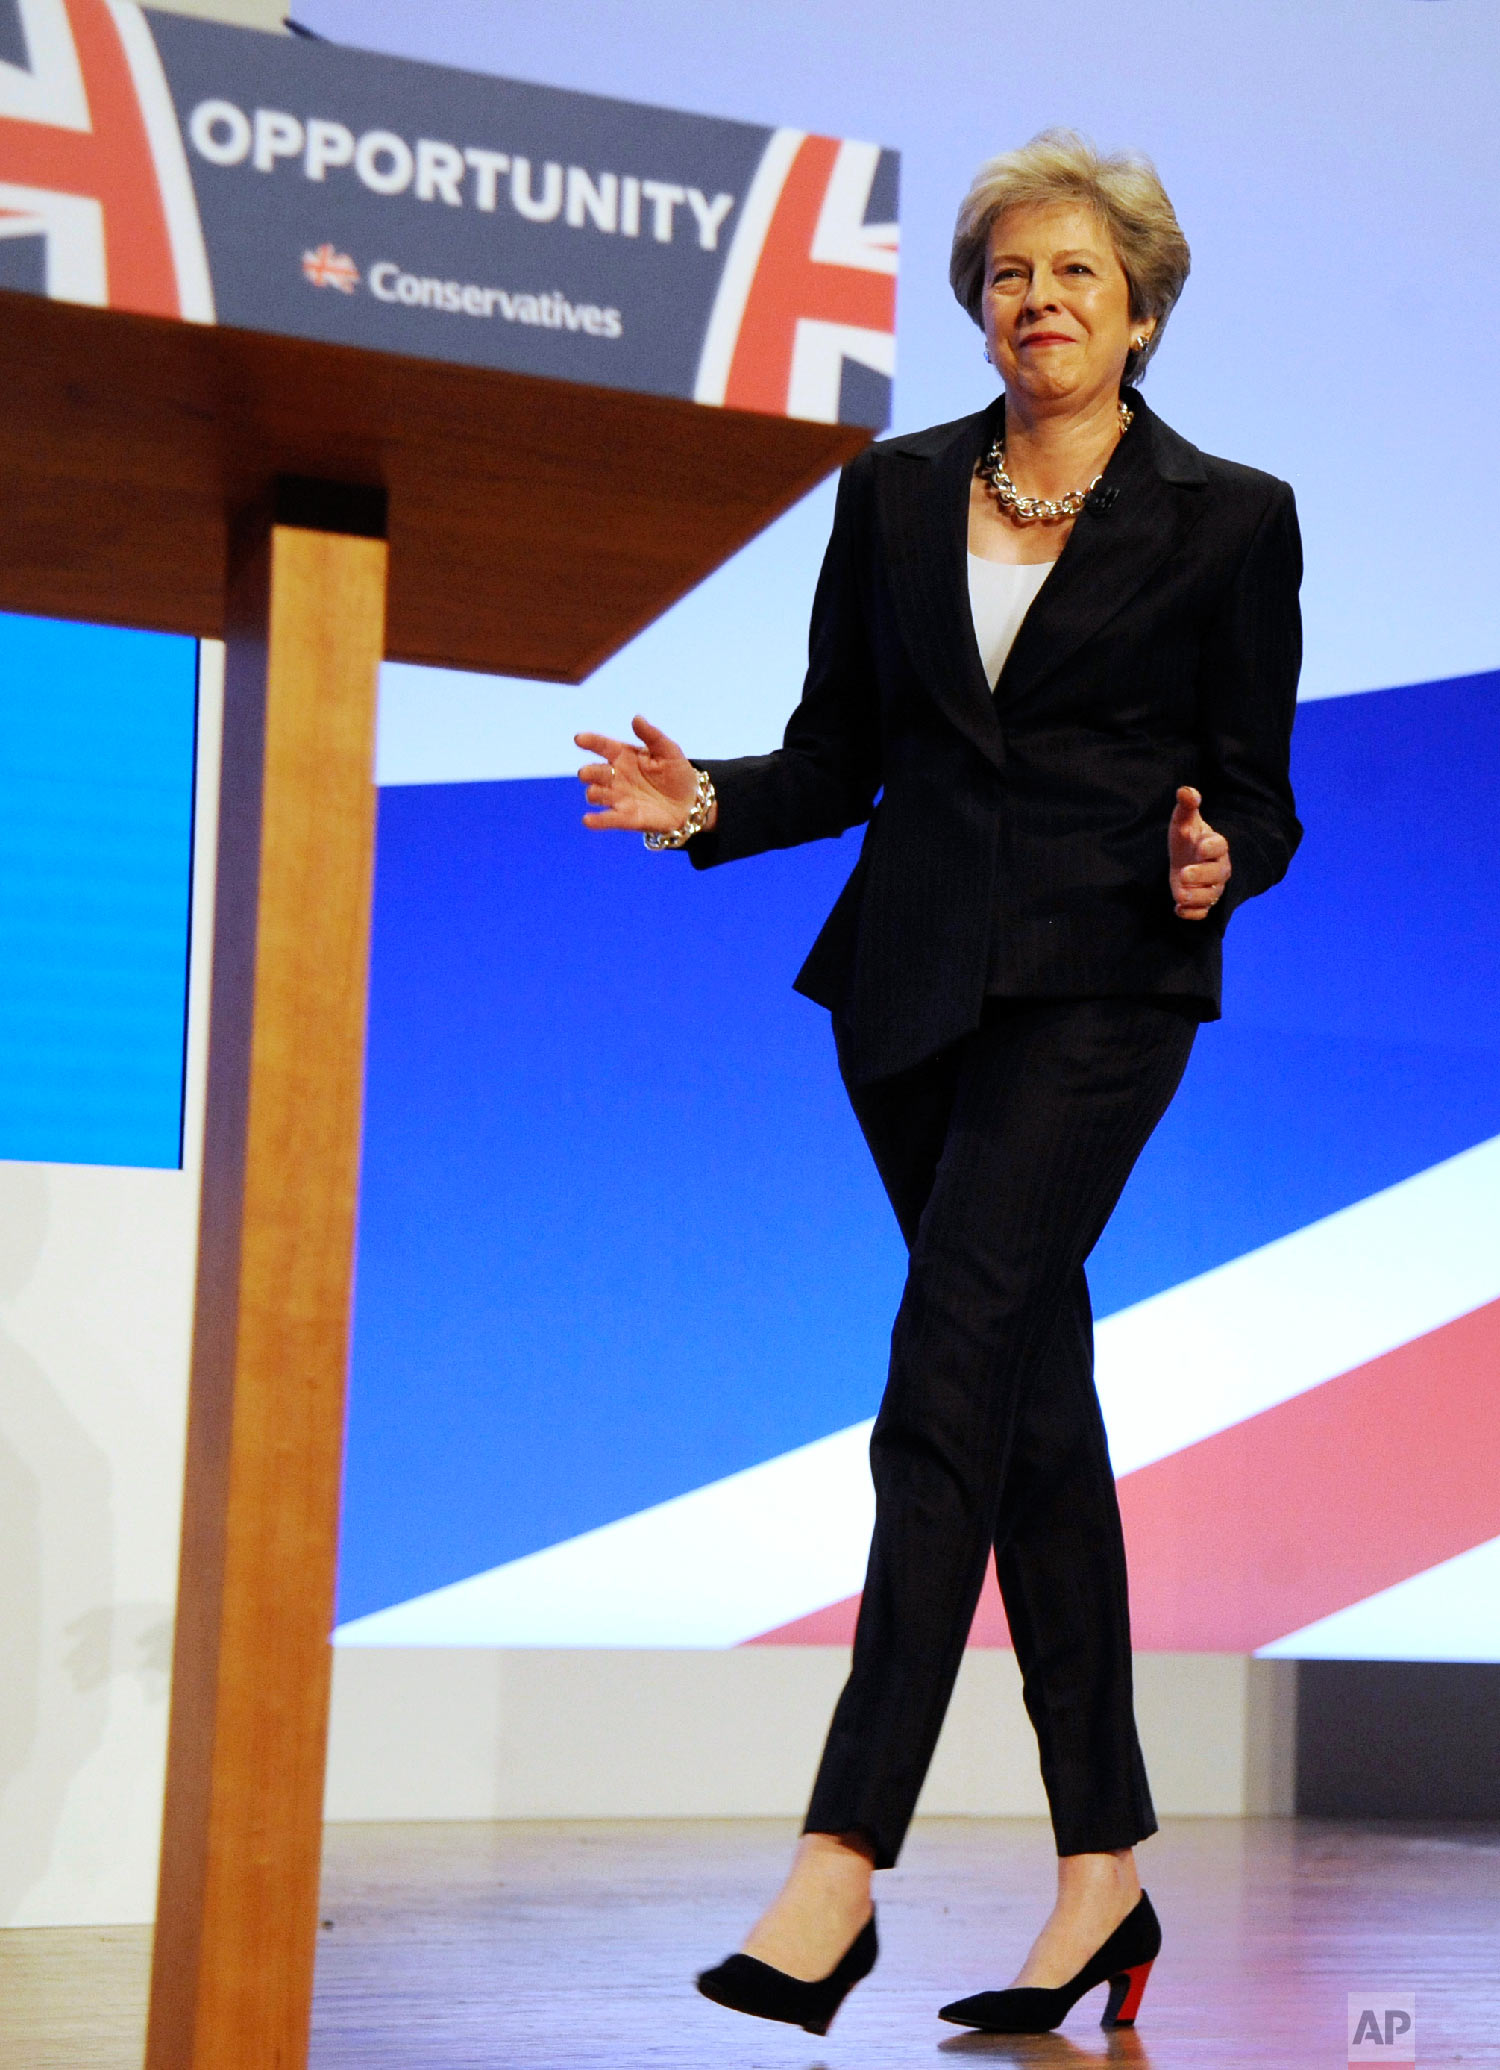  Conservative Party Leader and Prime Minister Theresa May dances as she arrives on stage to address delegates during a speech at the Conservative Party Conference at the ICC, in Birmingham, England on Oct. 3 , 2018. (AP Photo/Rui Vieira) 